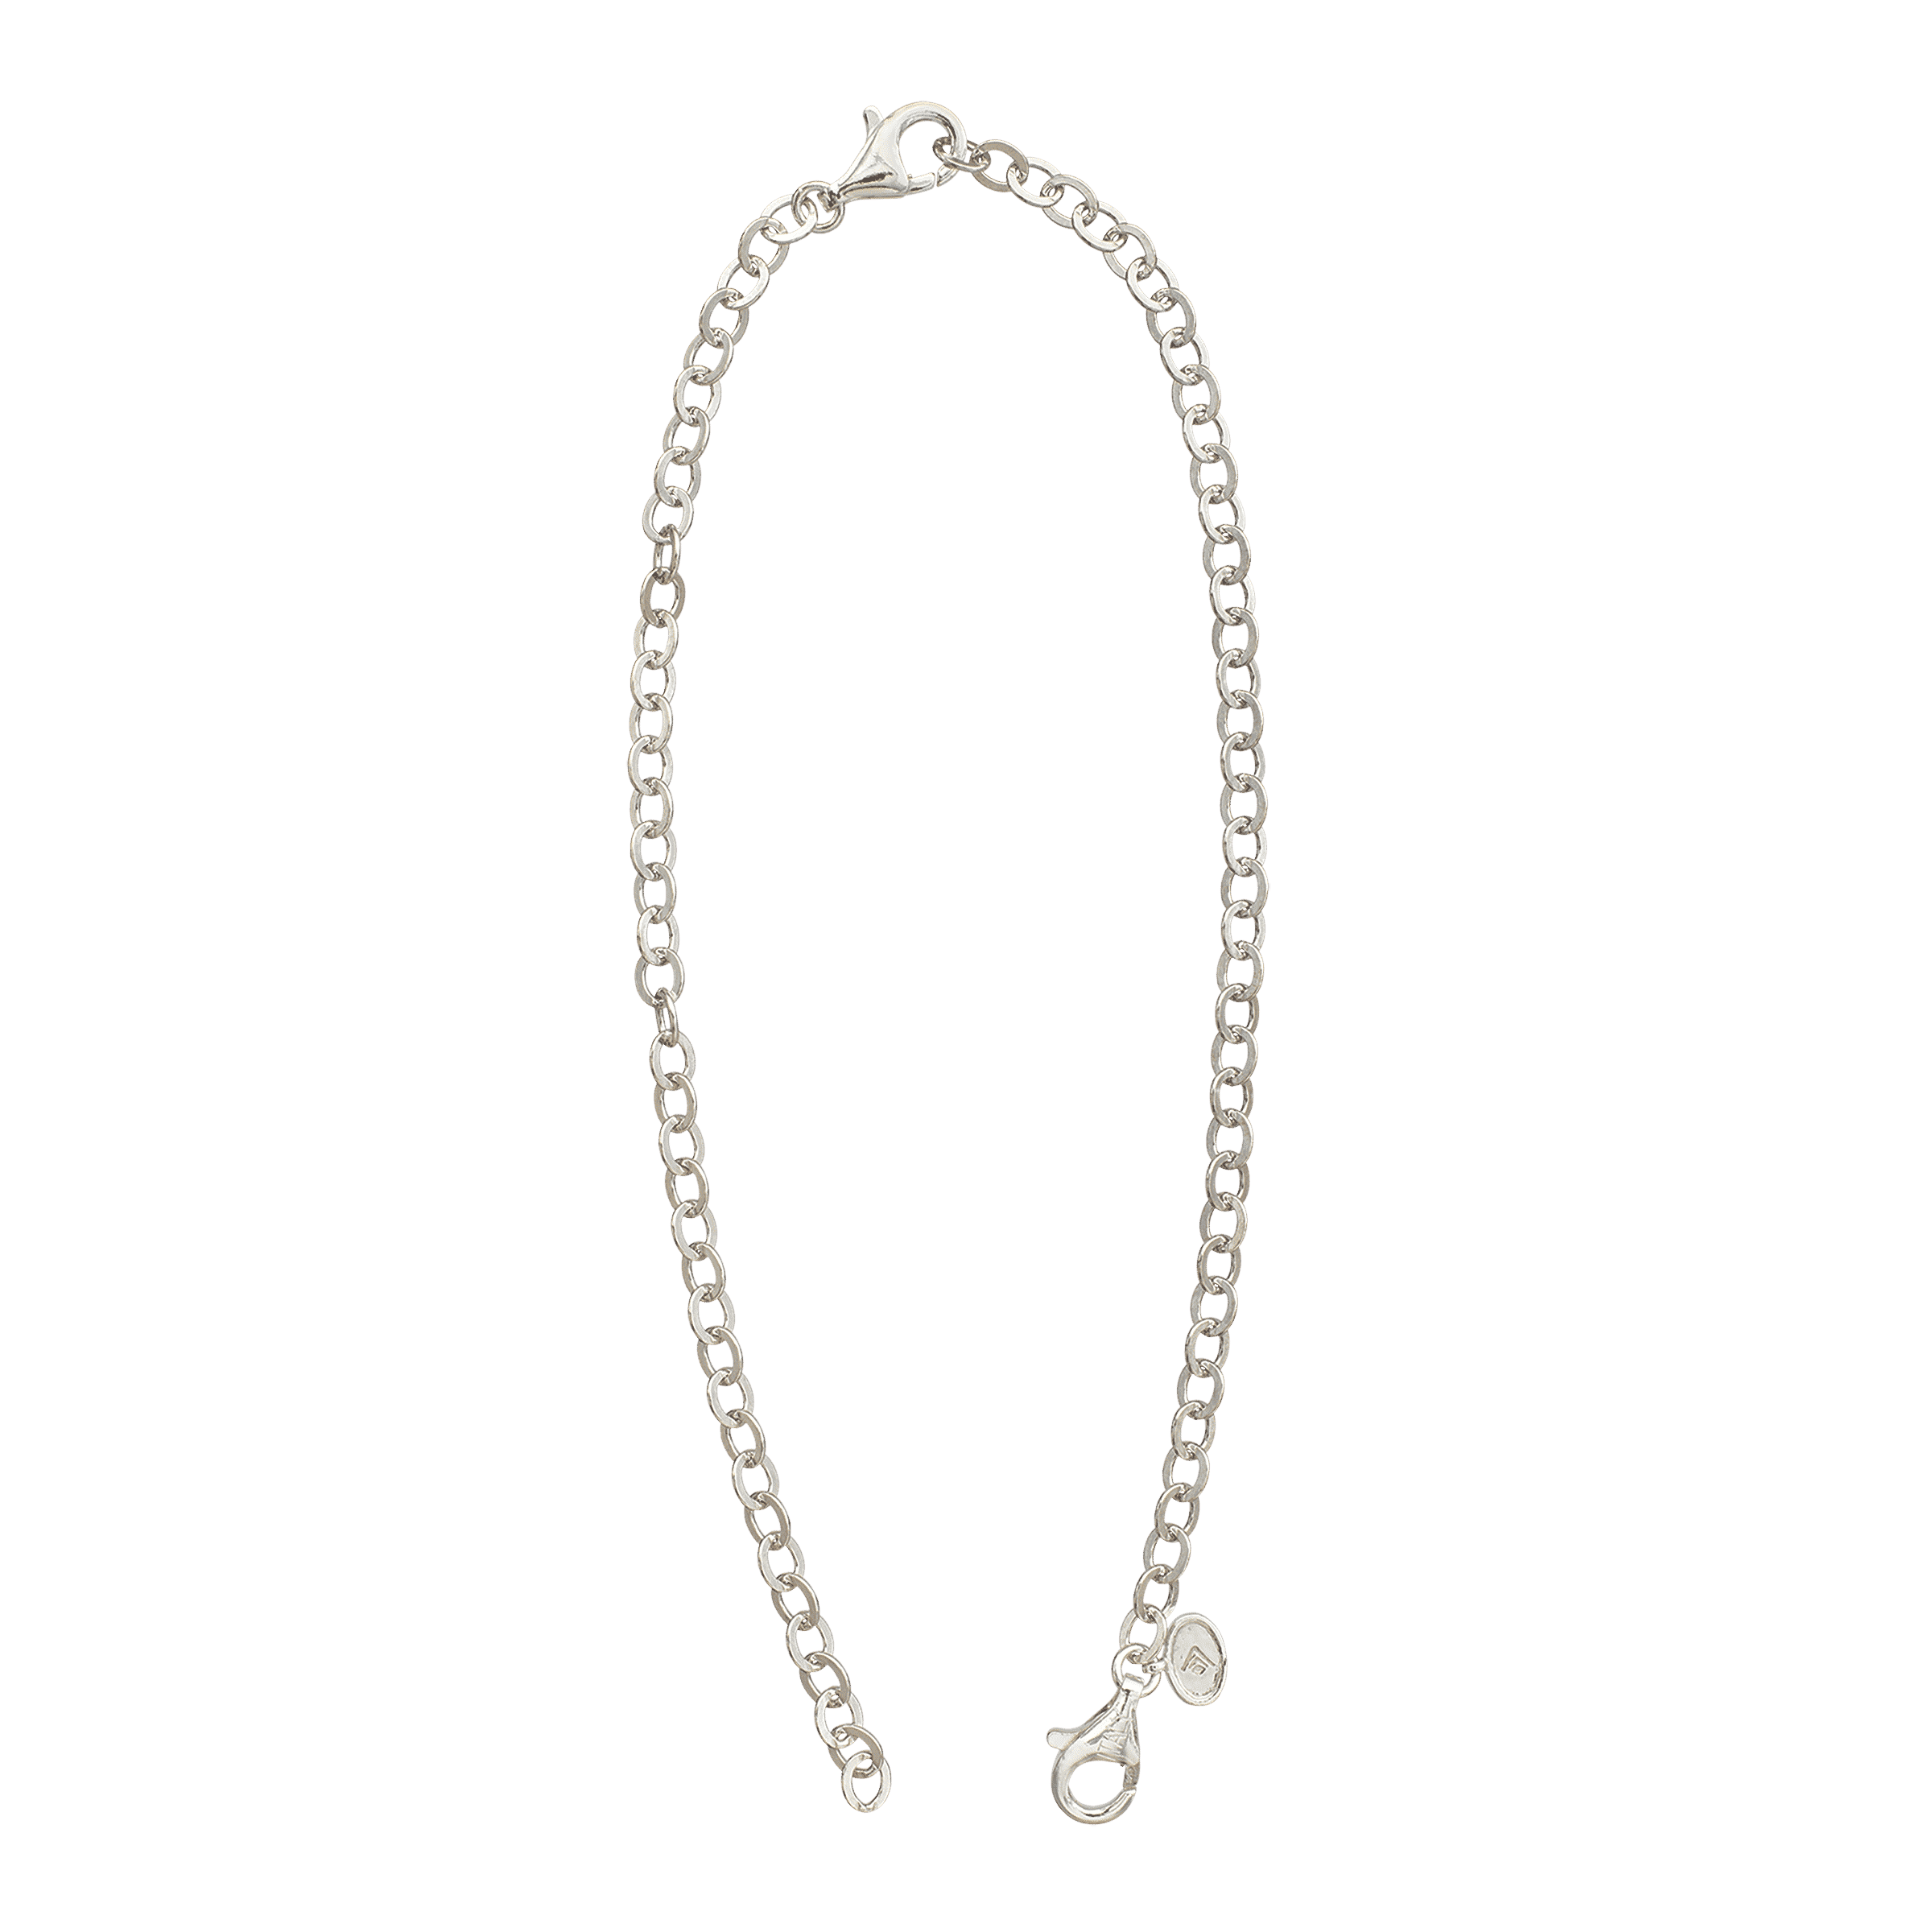 Sterling Silver 1mm Necklace Extender Chain | Available Lengths 1 inch, 2 inch, 3 inch, 4 inch, 5 inch, 6 inch | Extension Chain for Your Necklace